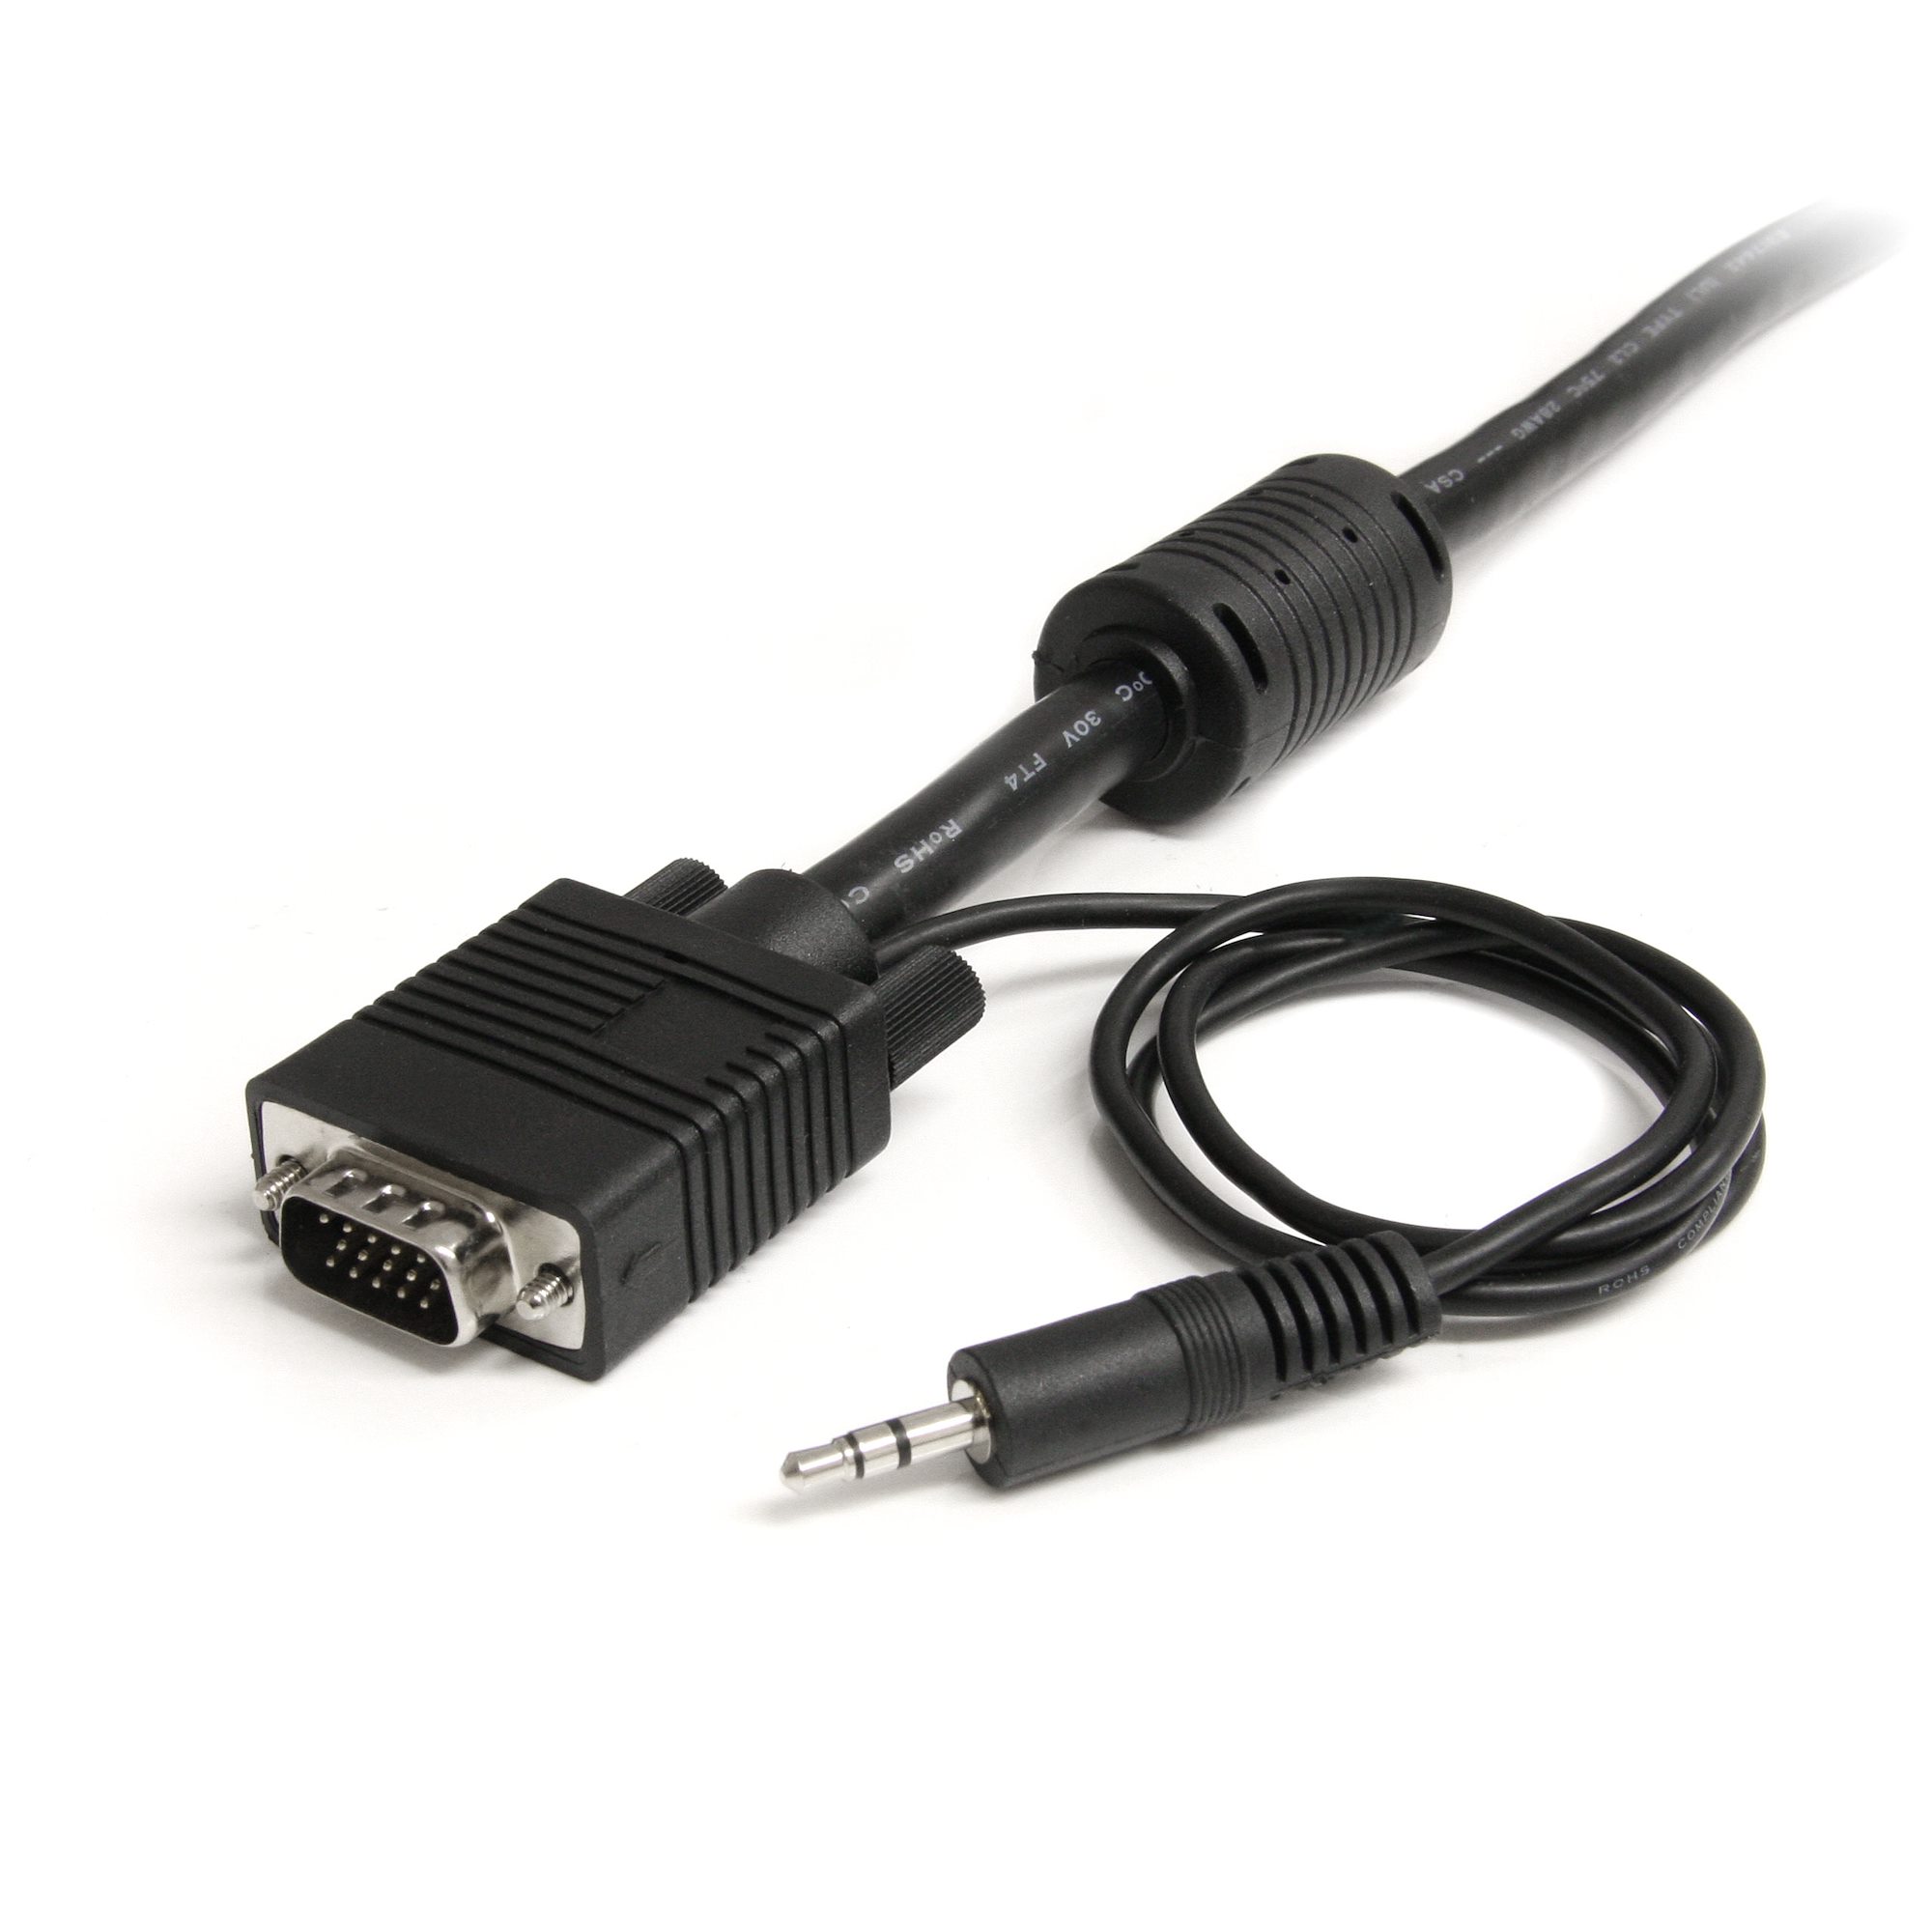 35ft HD15 to HD15 Cable MXT101MMHQ35 35ft VGA Monitor Cable Black HD15 M/M StarTech.com 35 ft Coax High Resolution Monitor VGA Cable 